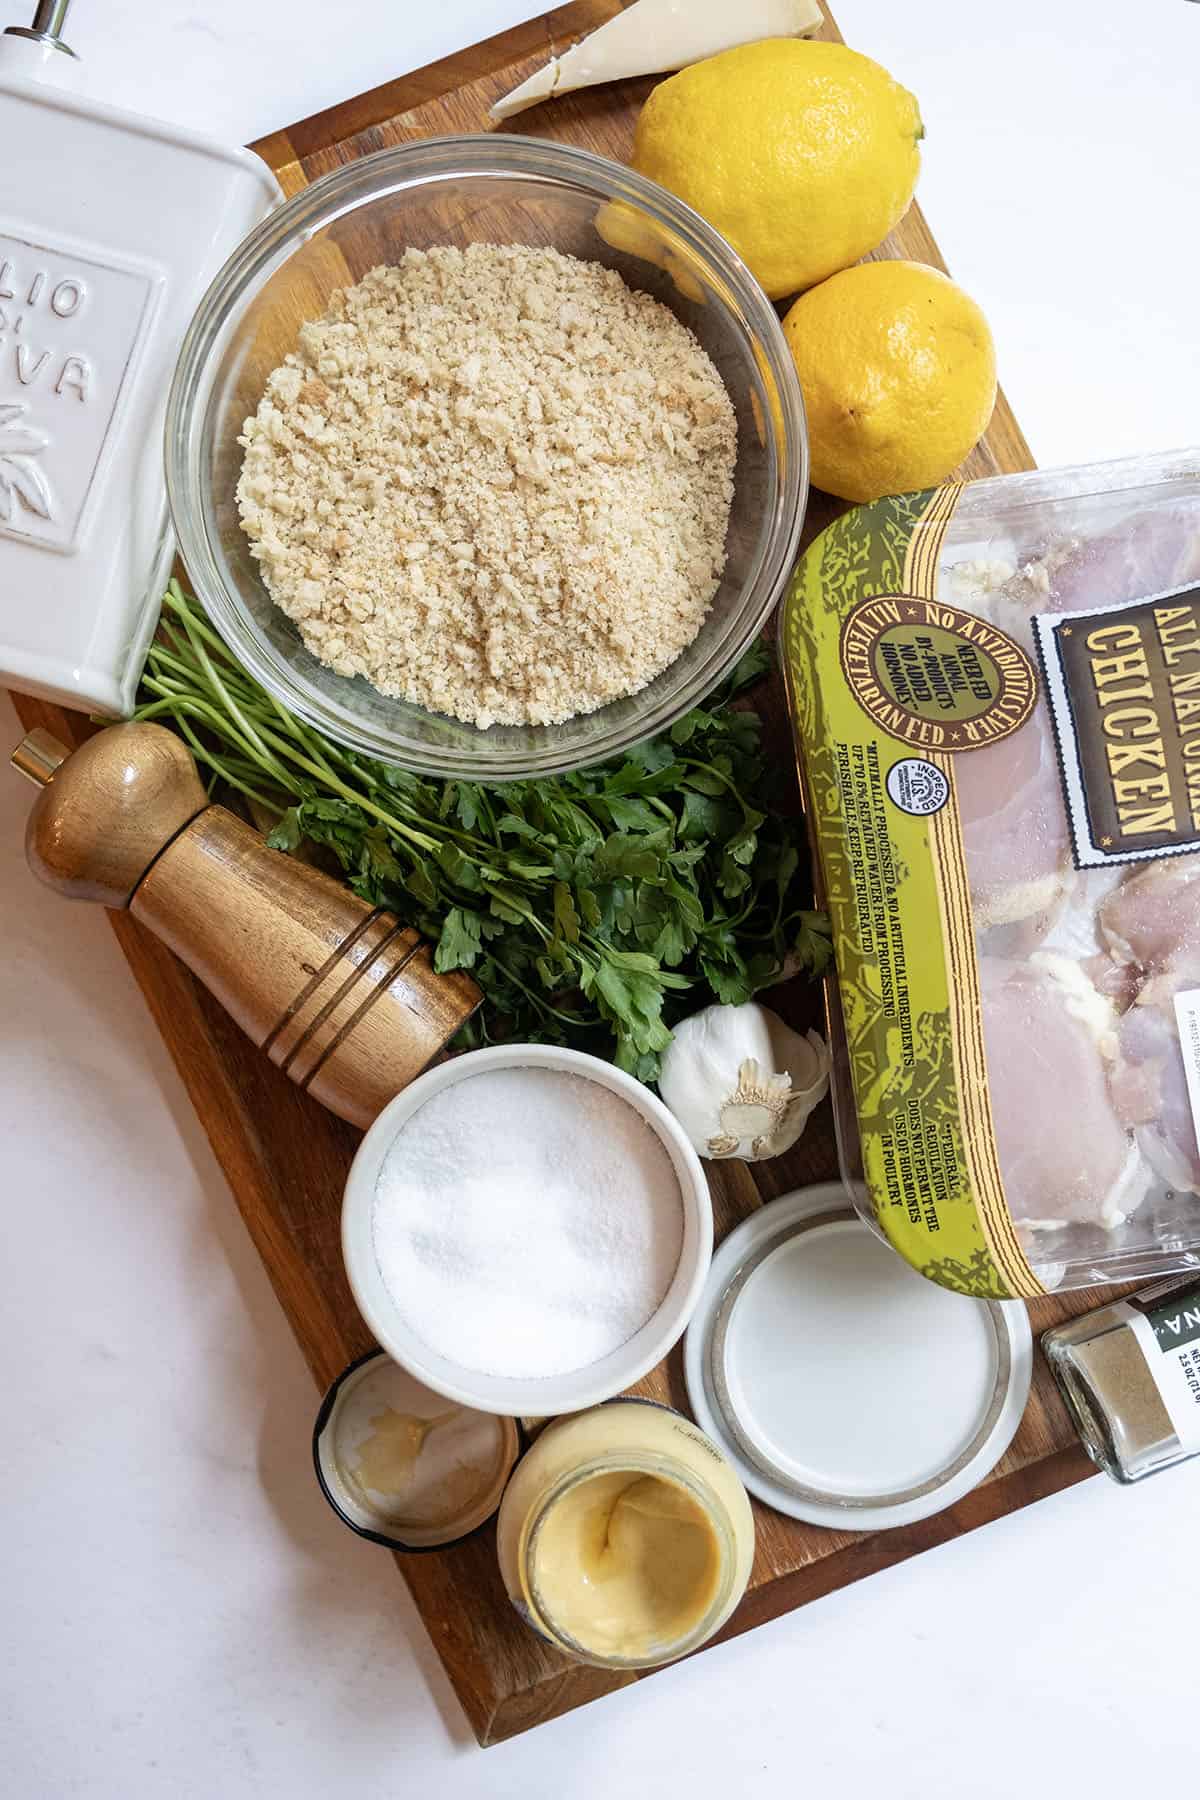 ingredients for the recipe